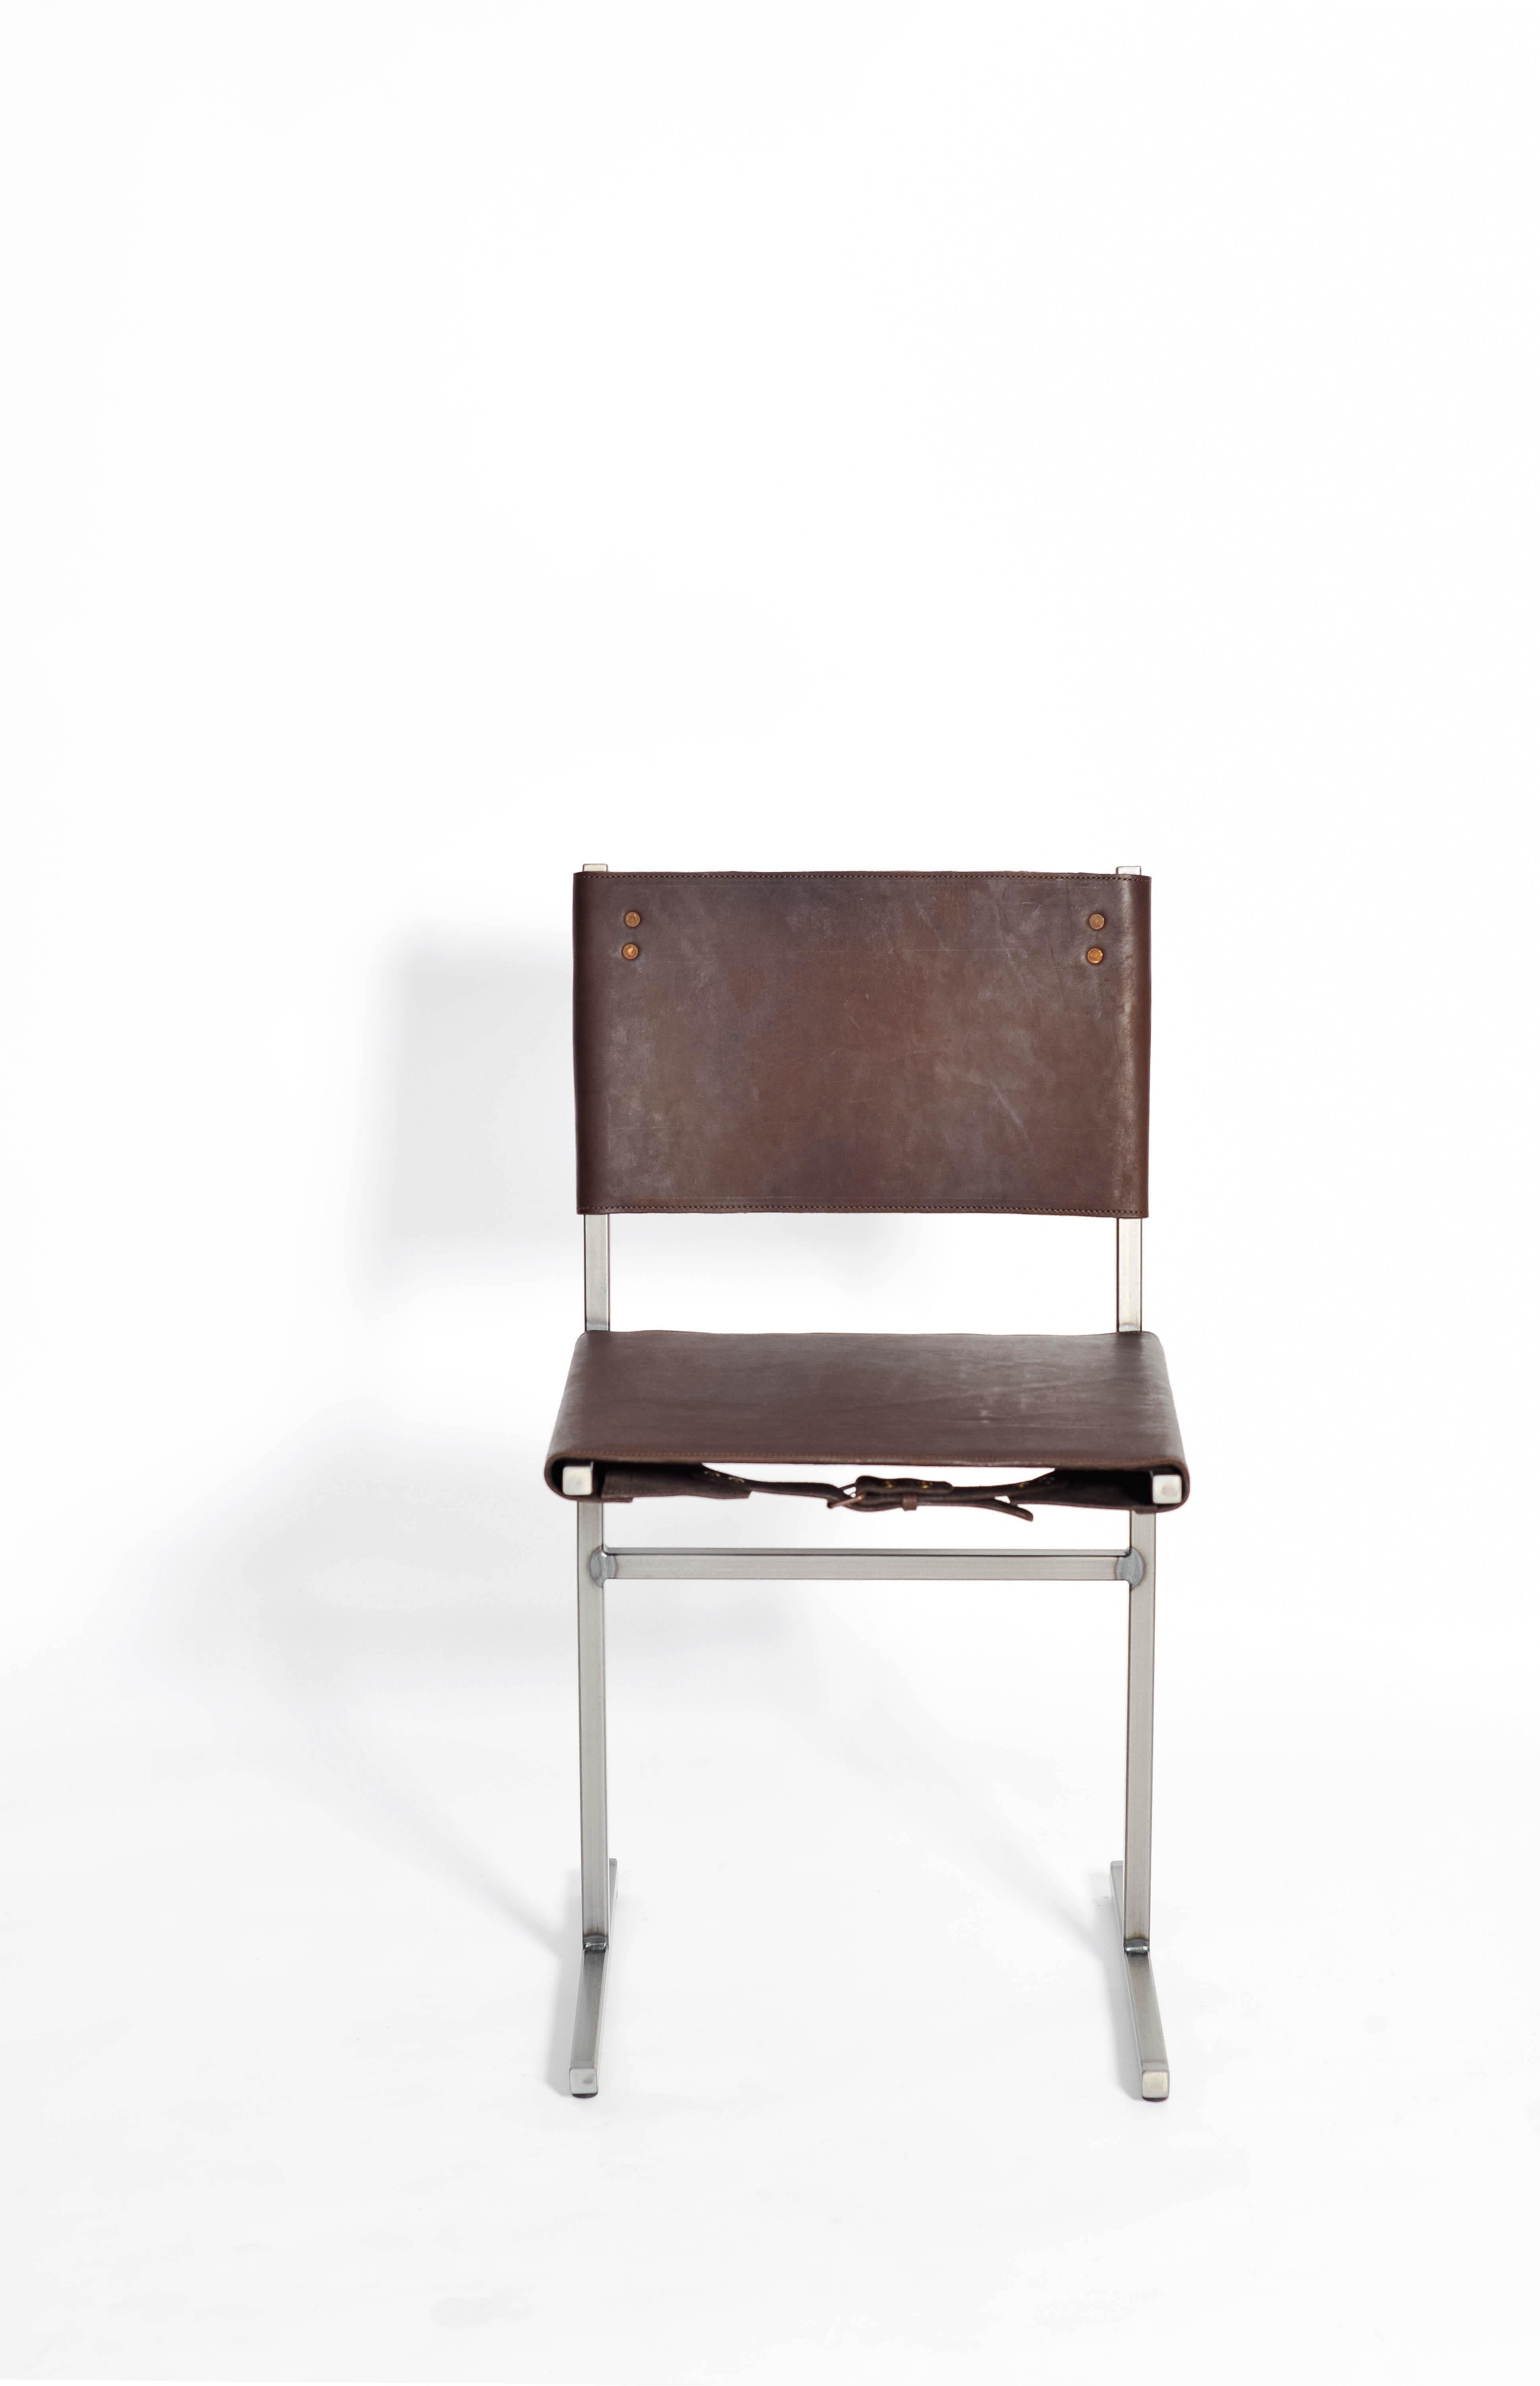 Steel Classic Brown and Brass Memento Chair, Jesse Sanderson